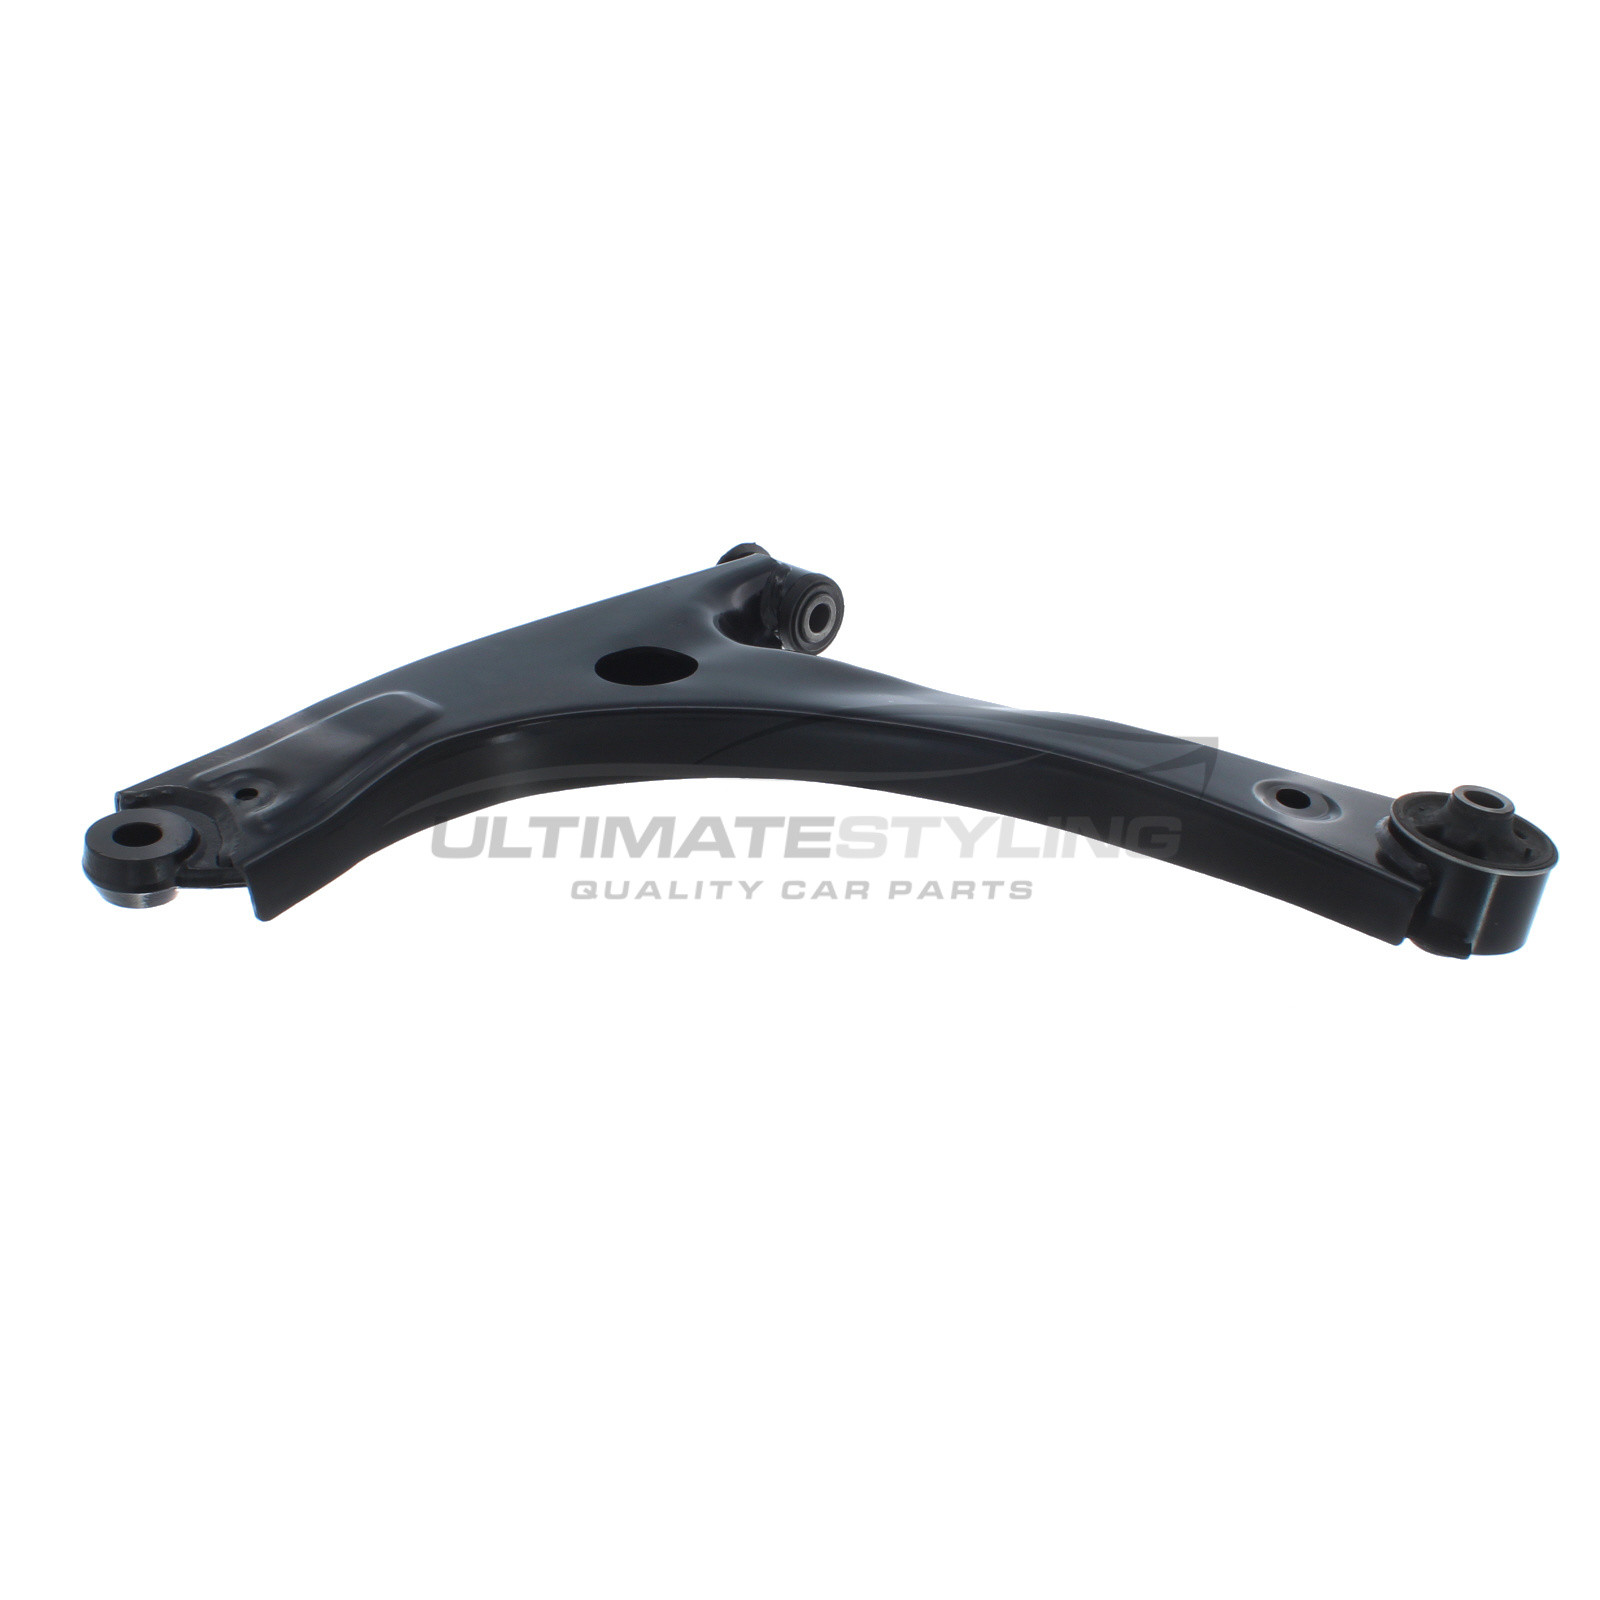 Ford Tourneo Custom 2012-3000, Ford Transit 2014-3000, Ford Transit Custom 2012-3000 Front Lower Suspension Arm (Steel) Excluding Ball Joint and Rear Bush (Standard Duty) Passenger Side (LH)